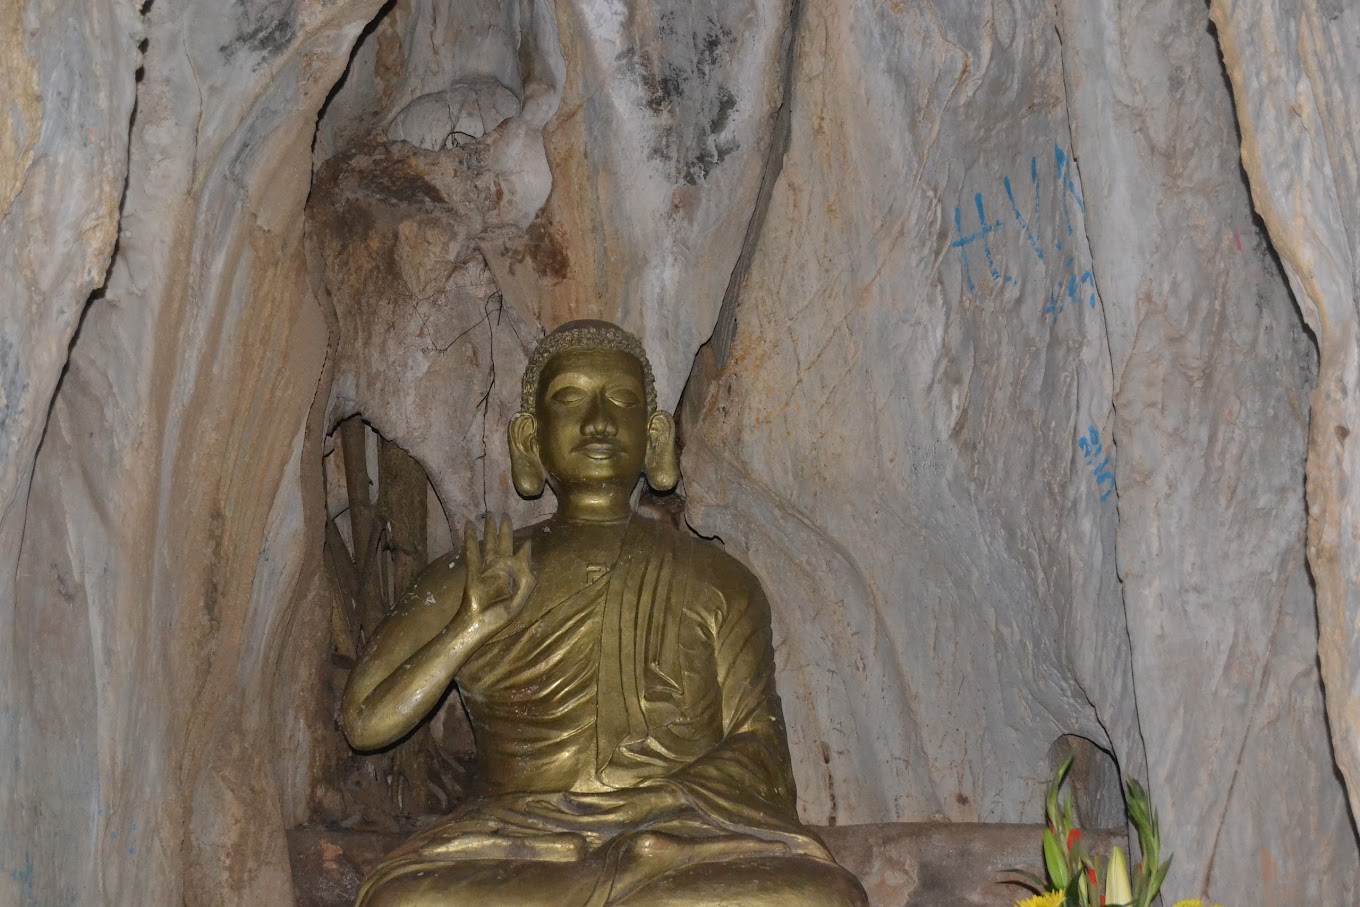 Inside Huyen Khong Cave, there are many spiritual Buddha statues, creating a reverent and solemn atmosphere.